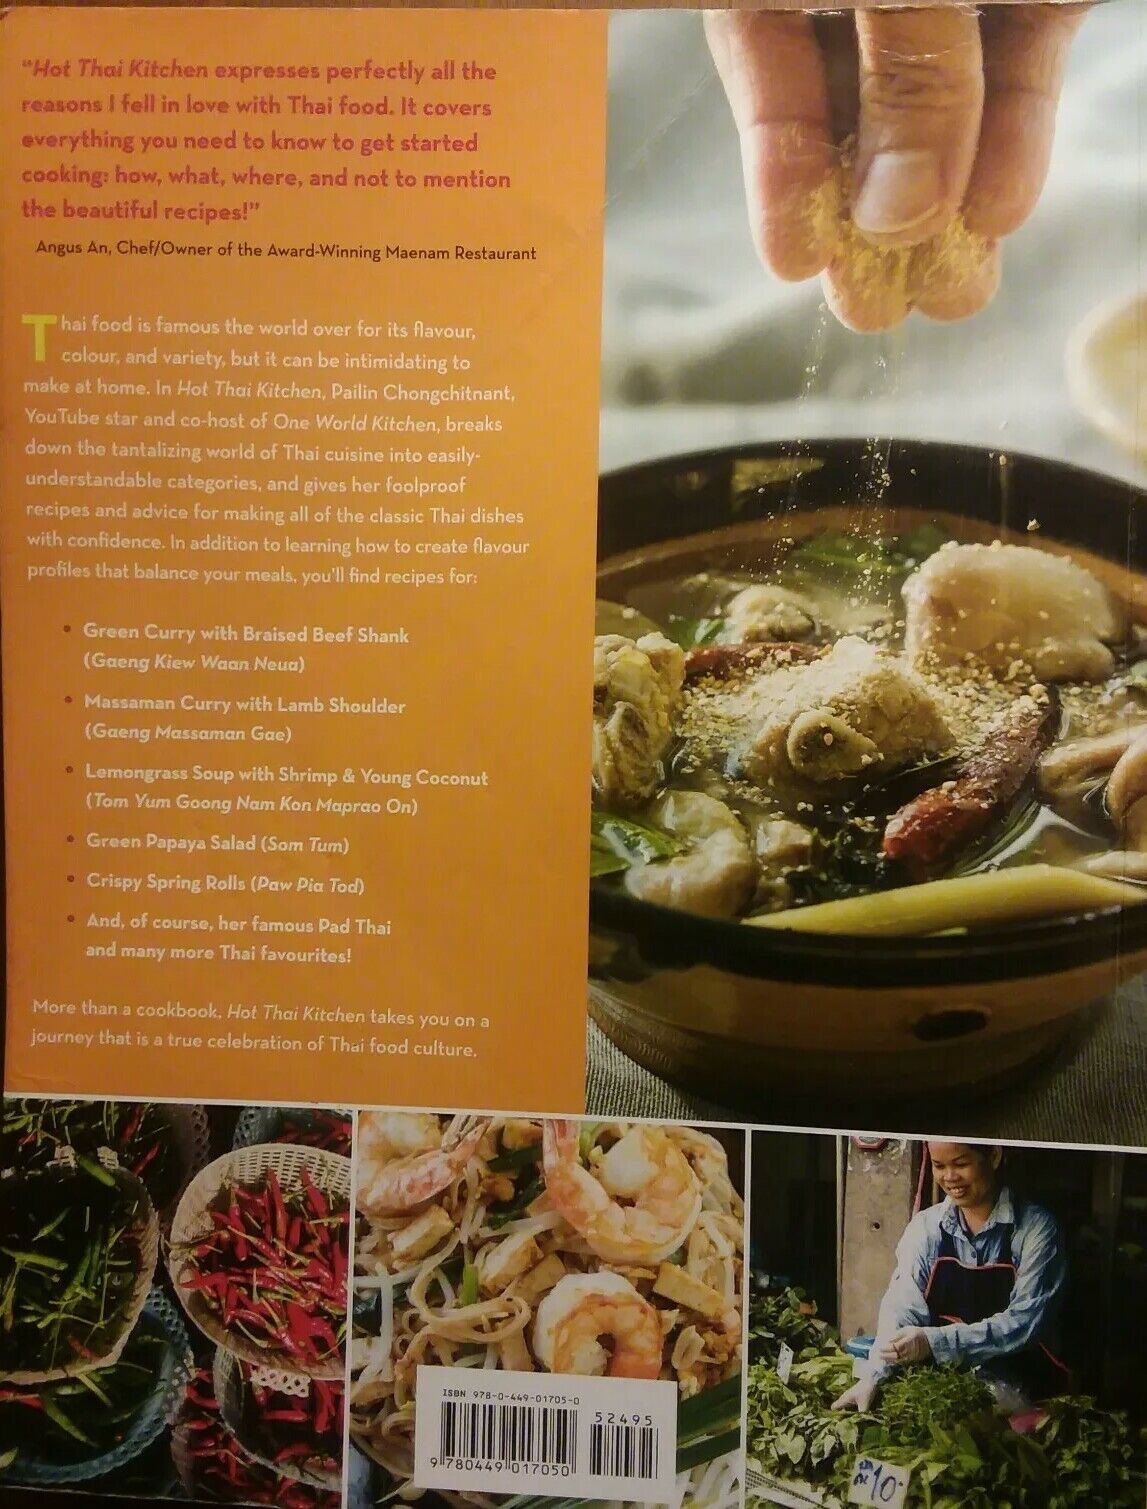 Hot Thai Kitchen Demystifying Thai Cuisine With Authentic Recipes To Make At Home By Pailin Chongchitnant 2016 Trade Paperback For Sale Online Ebay